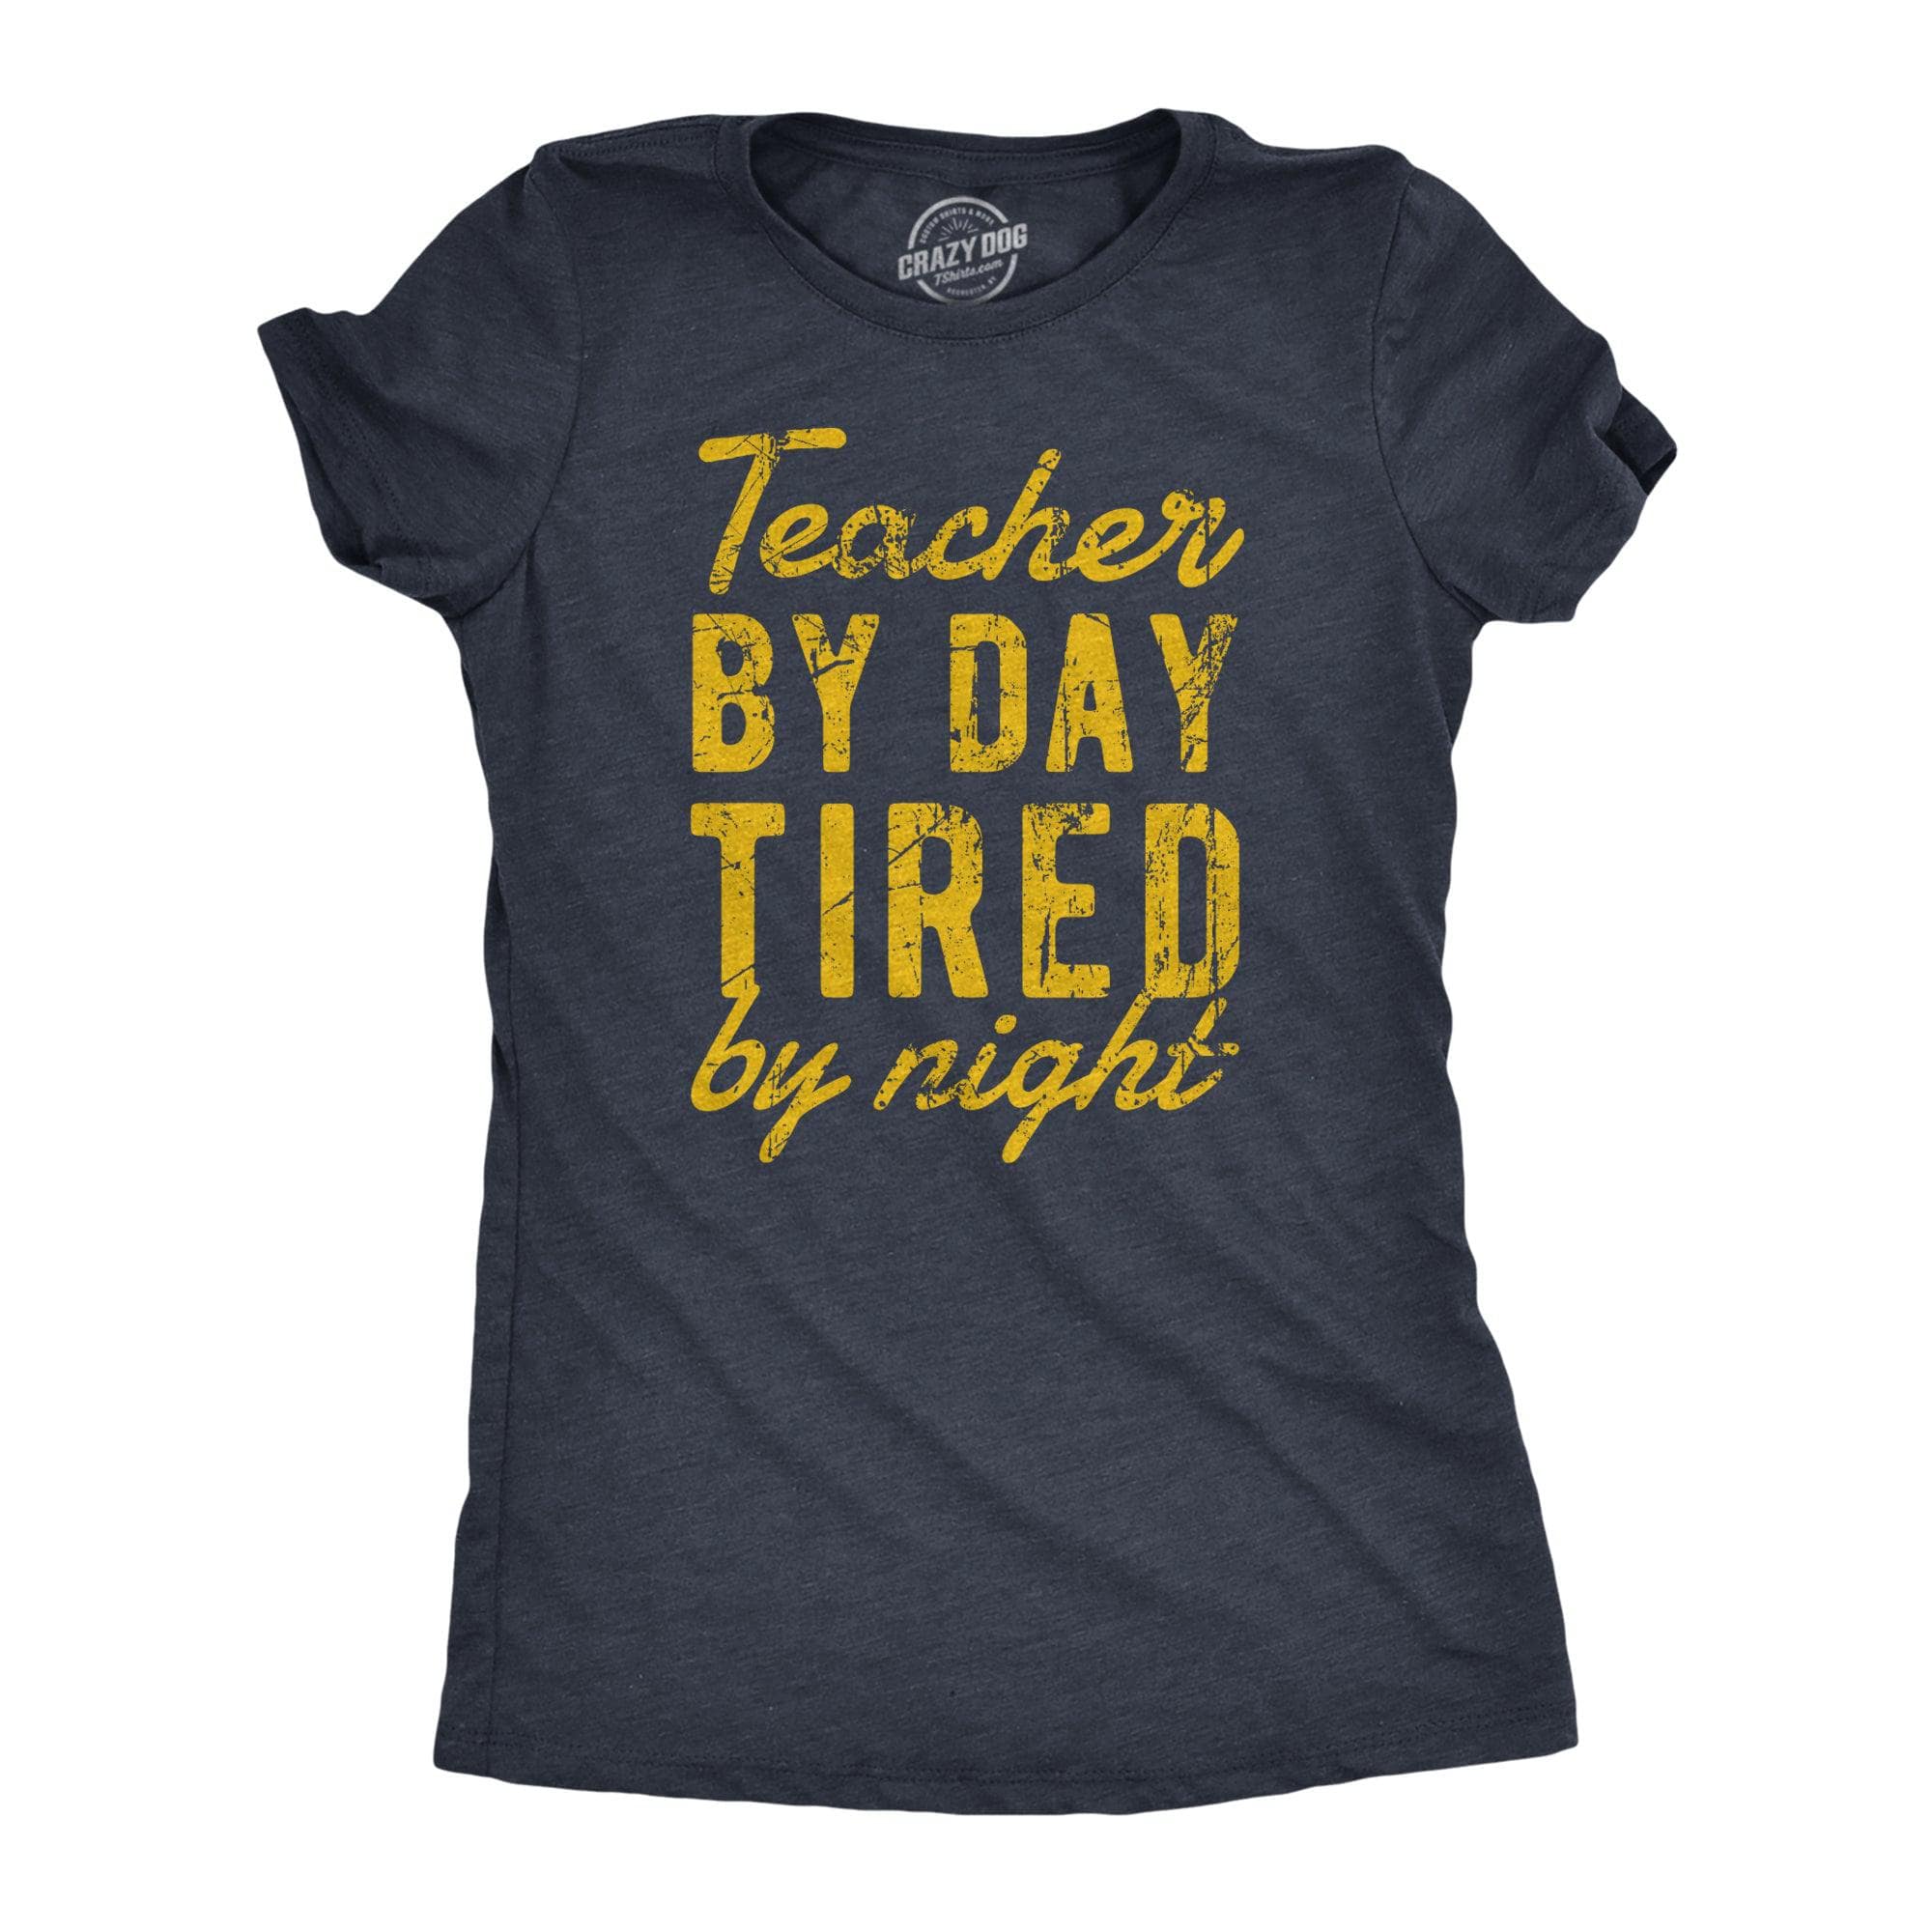 Teacher By Day Tired By Night Women's Tshirt  -  Crazy Dog T-Shirts